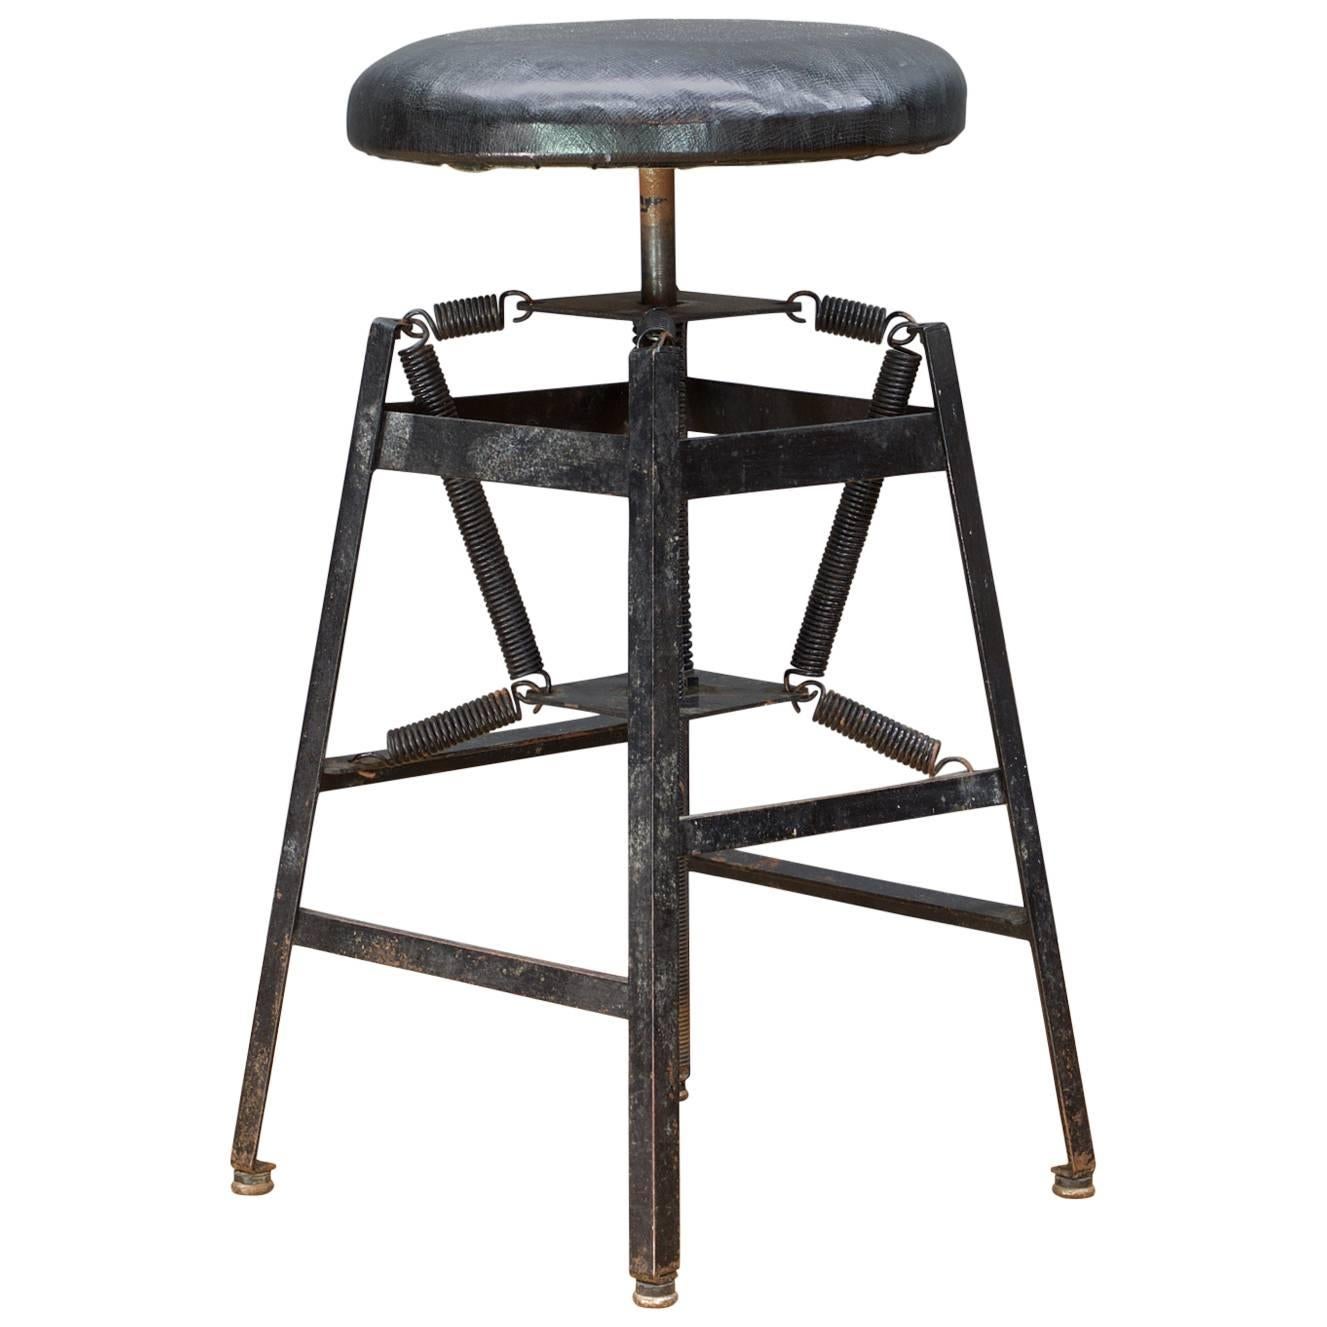 Rare Vintage Industrial Architects Black Drafting Spring Stool